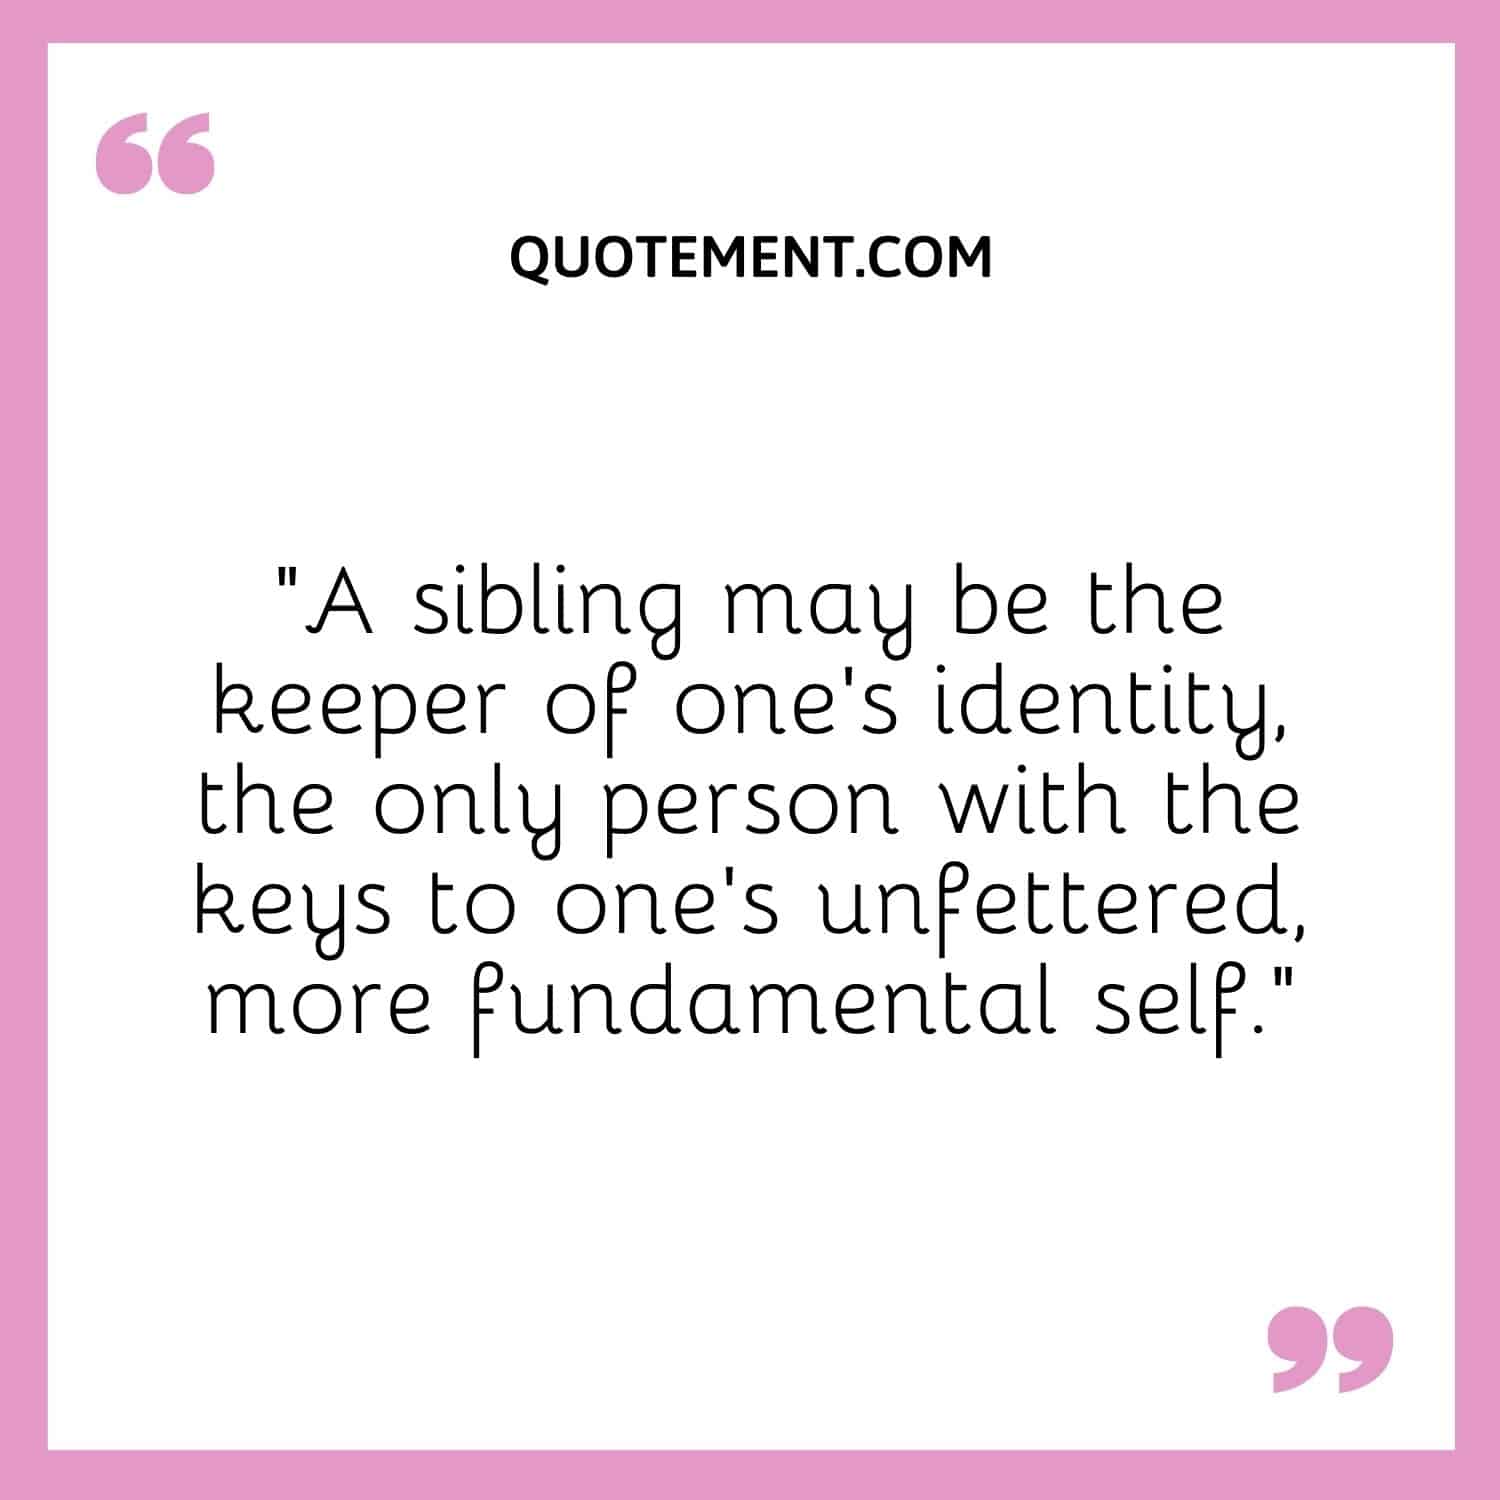 A sibling may be the keeper of one's identity, the only person with the keys to one's unfettered, more fundamental self.